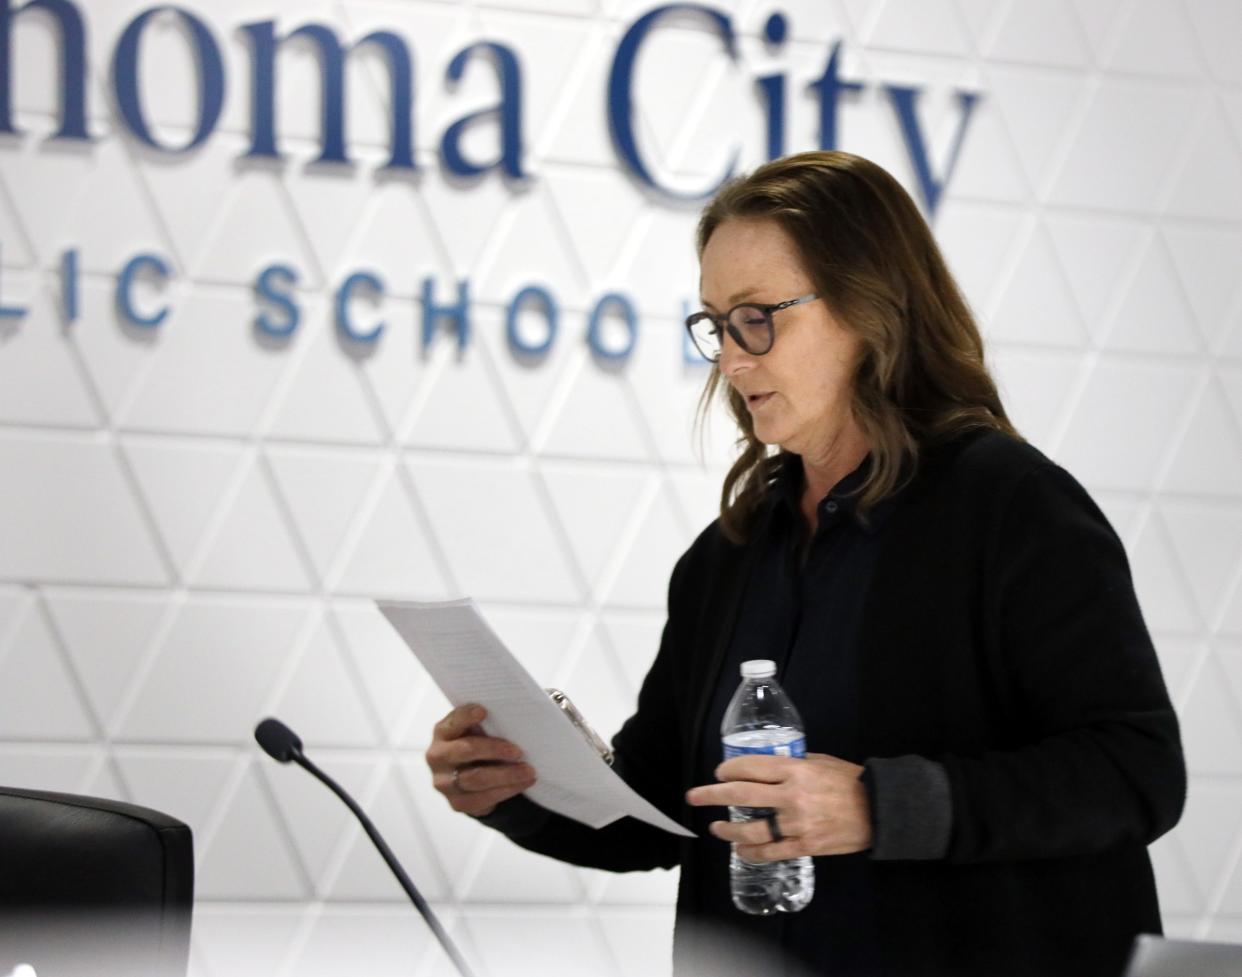 Oklahoma City Public Schools Board Chair Paula Lewis told fellow board members they needed to pass multiple items on the agenda for Monday's meeting to become compliant with a new state law.